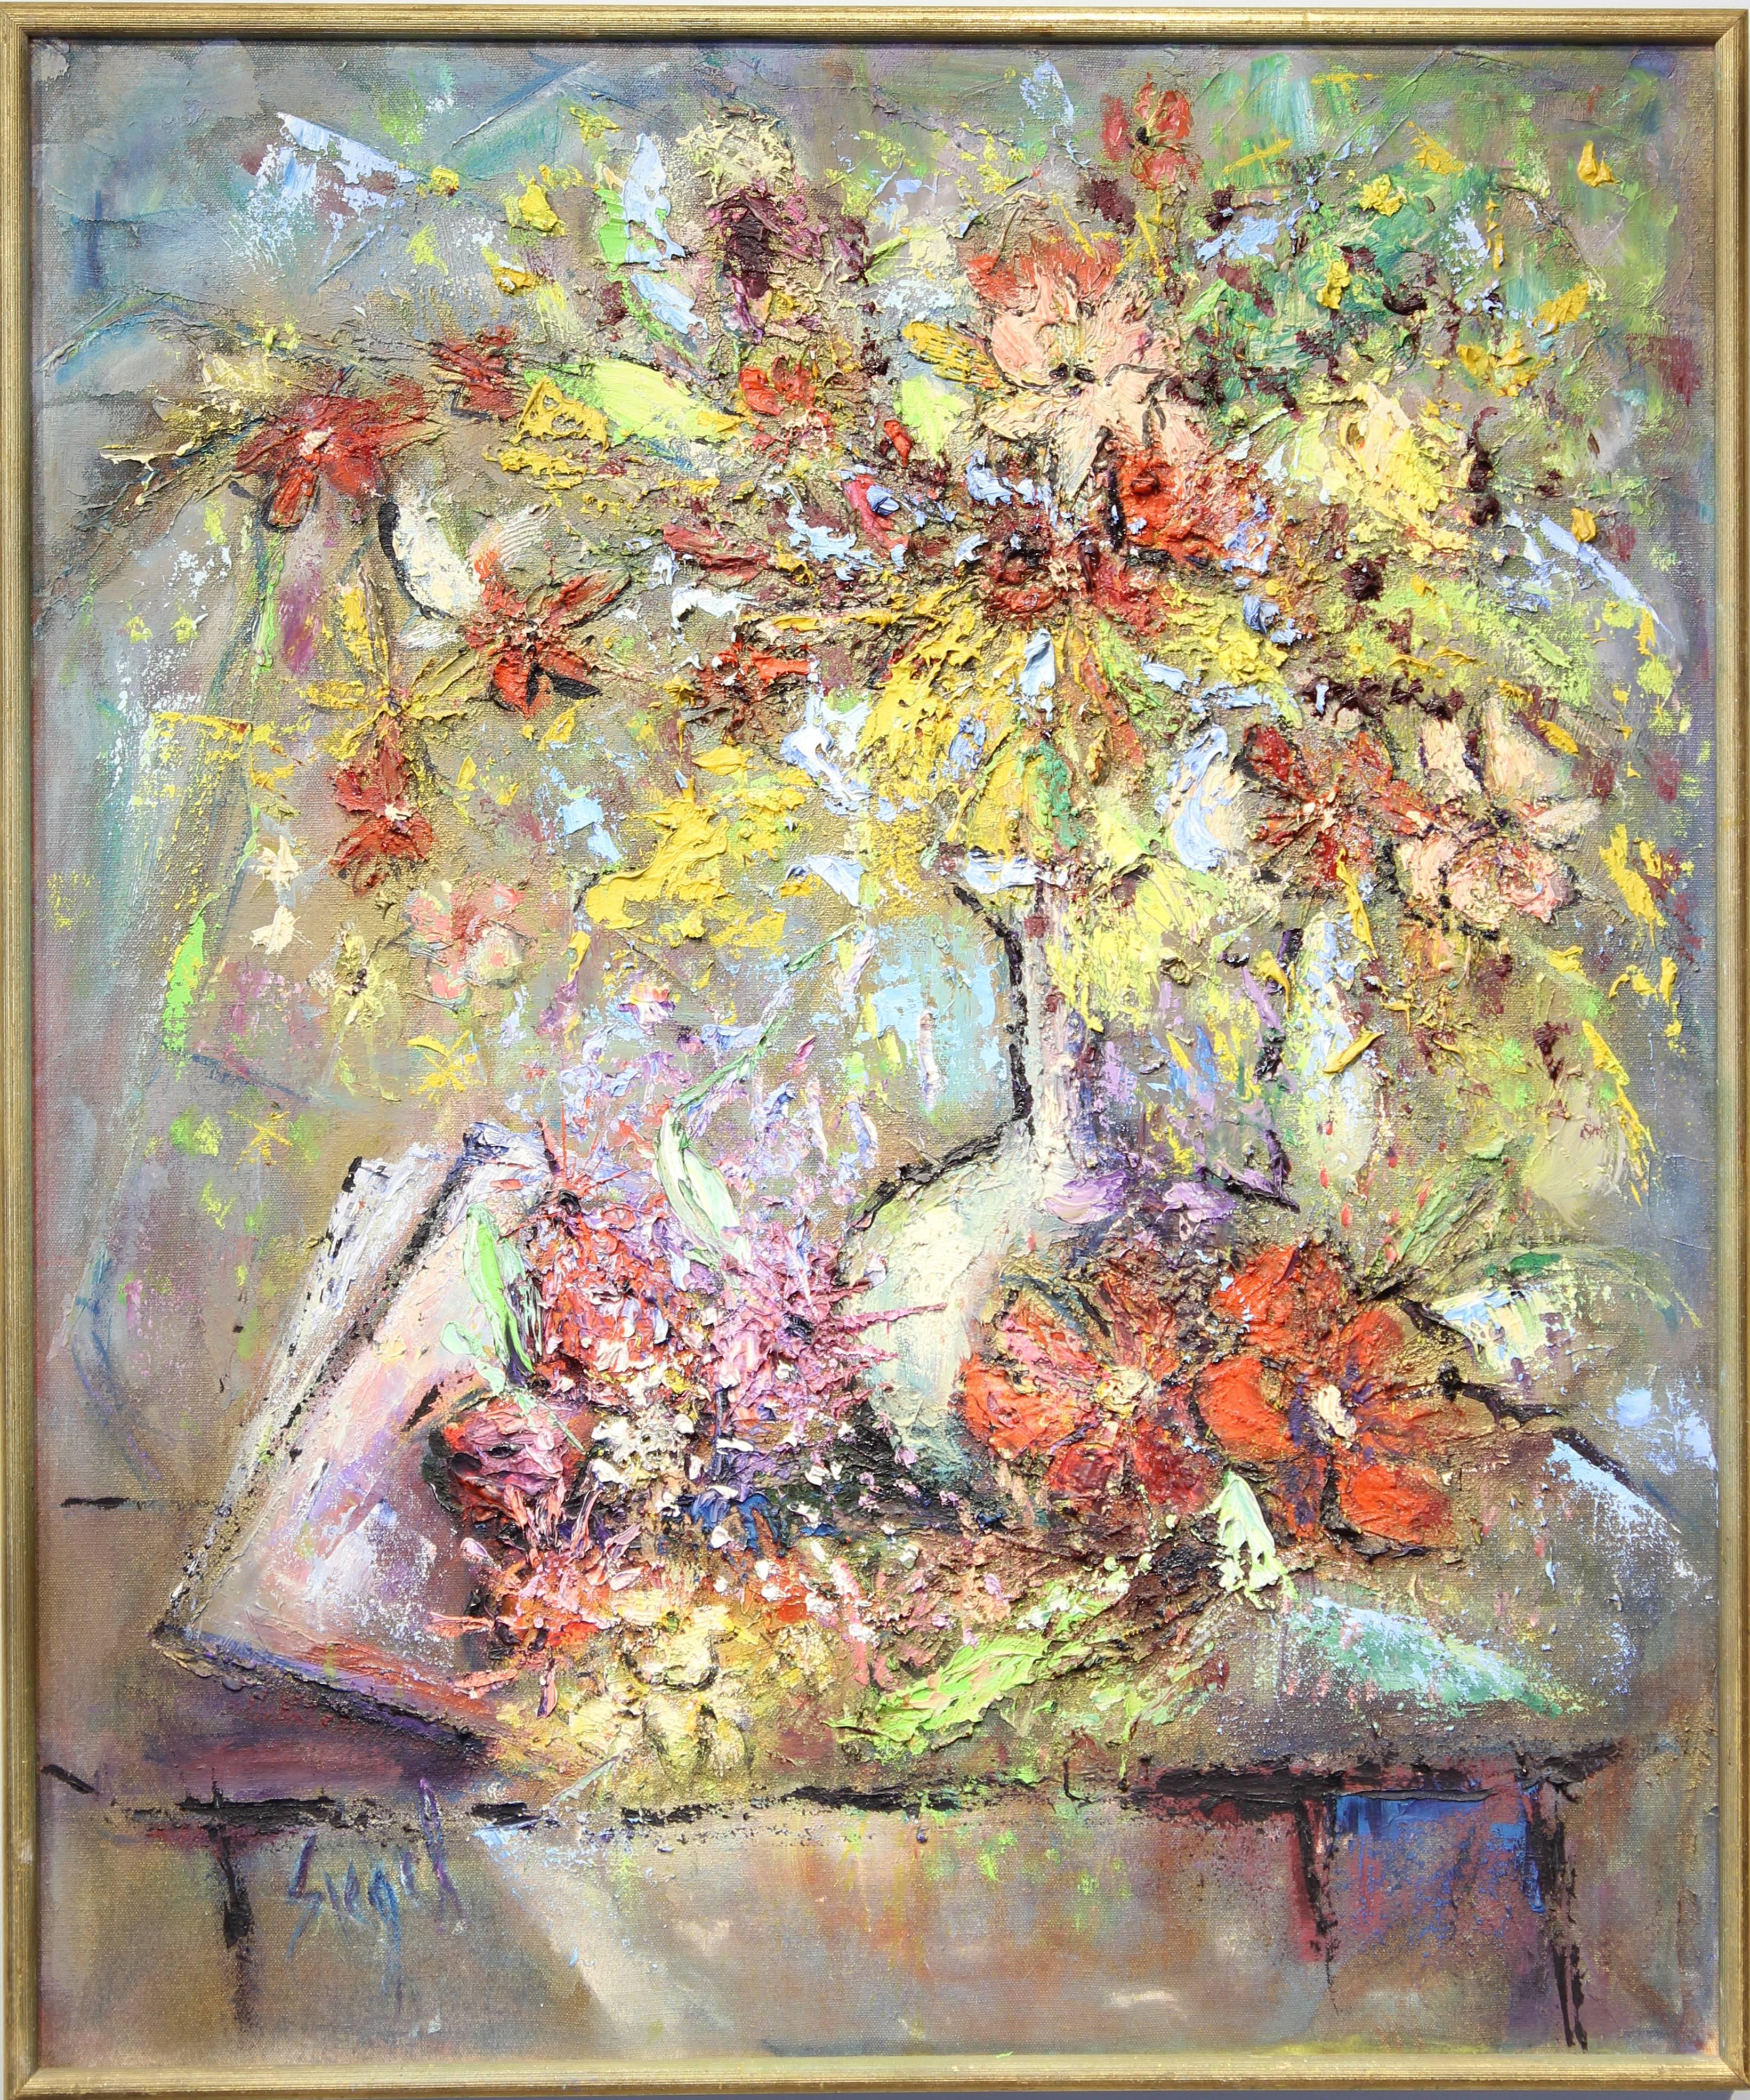 Irving D. Siegel Abstract Painting - Abstract Expressionist Painting of a Flower